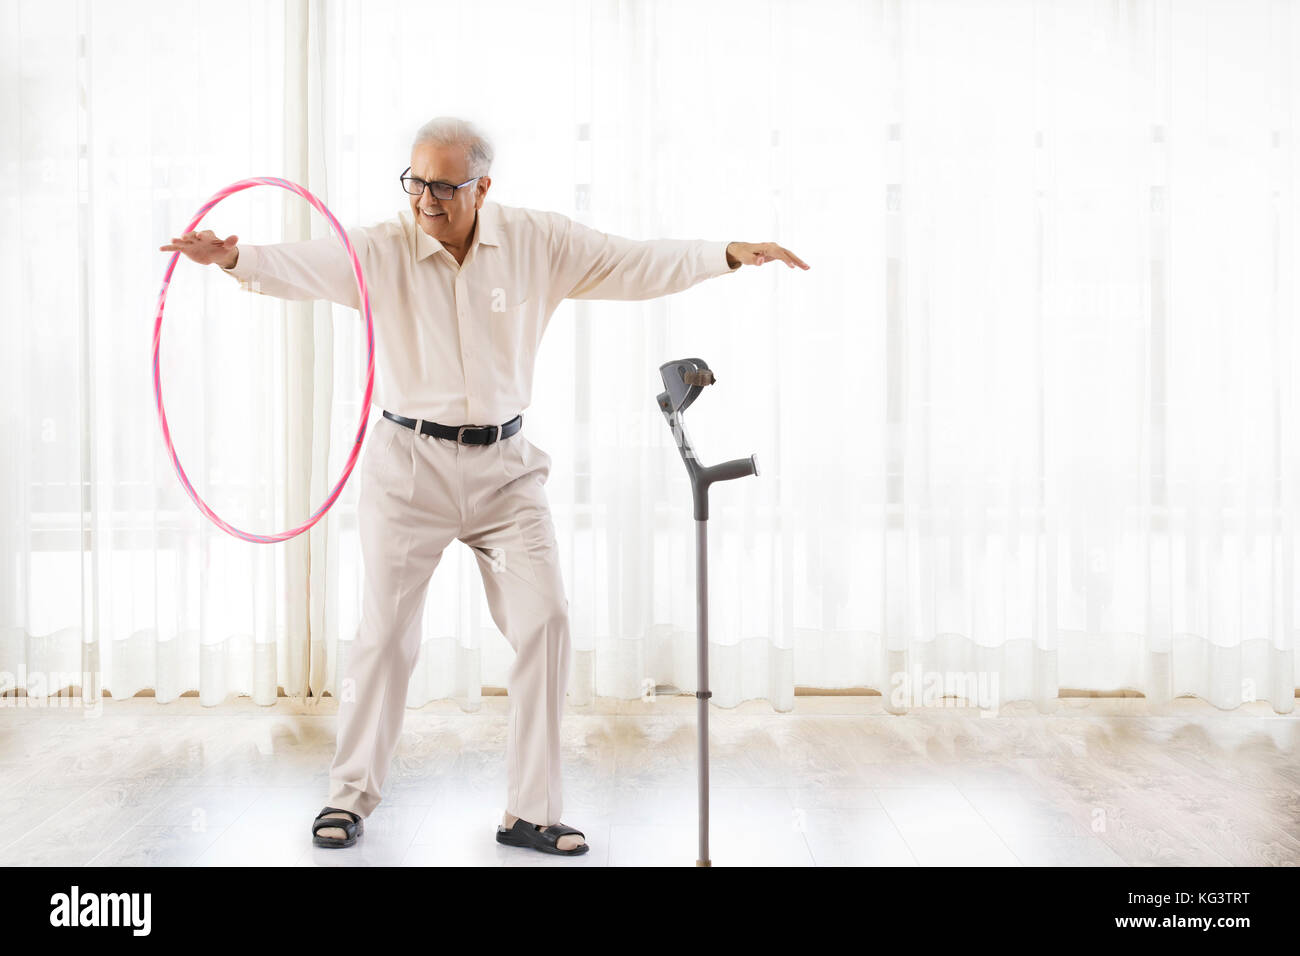 Senior man exercising with hoopla hoop Banque D'Images